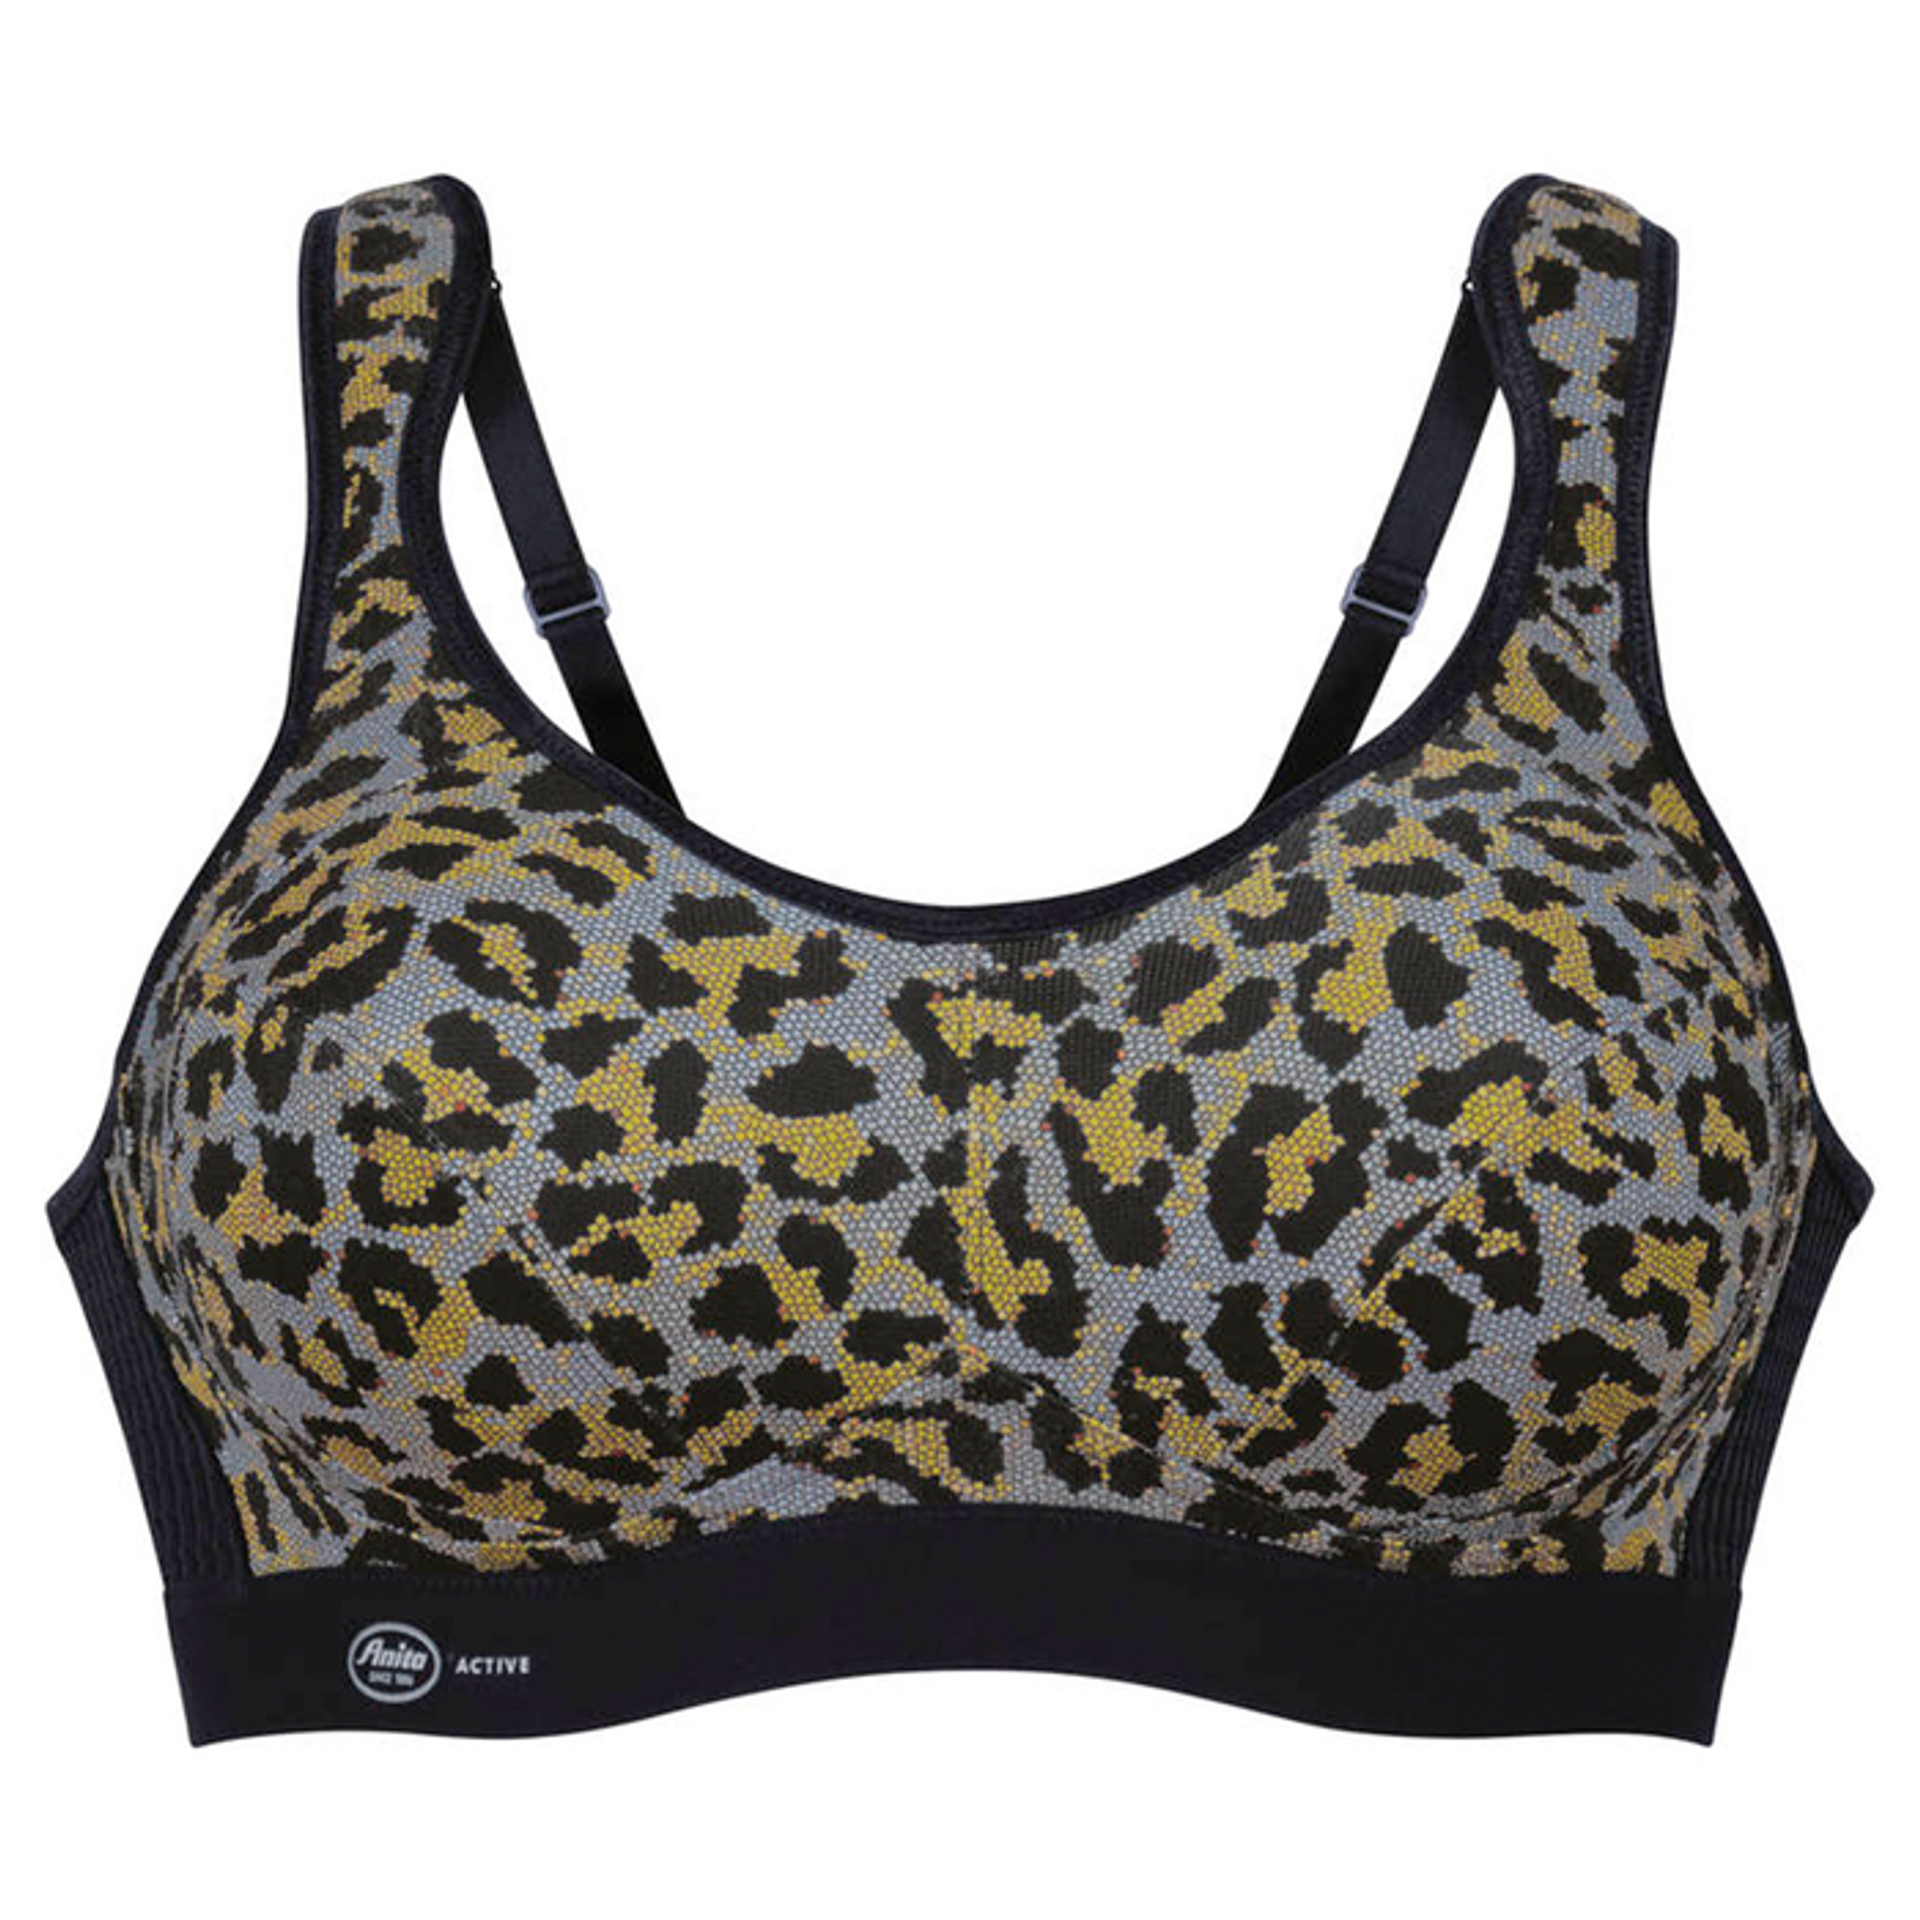 https://cdn11.bigcommerce.com/s-4s8gd94fum/images/stencil/1920w/products/127/708/an_5527_287_anita_extreme_control_sports_bra_mosaic_1_kcji0njakcf979y2__58221.1674645403.png